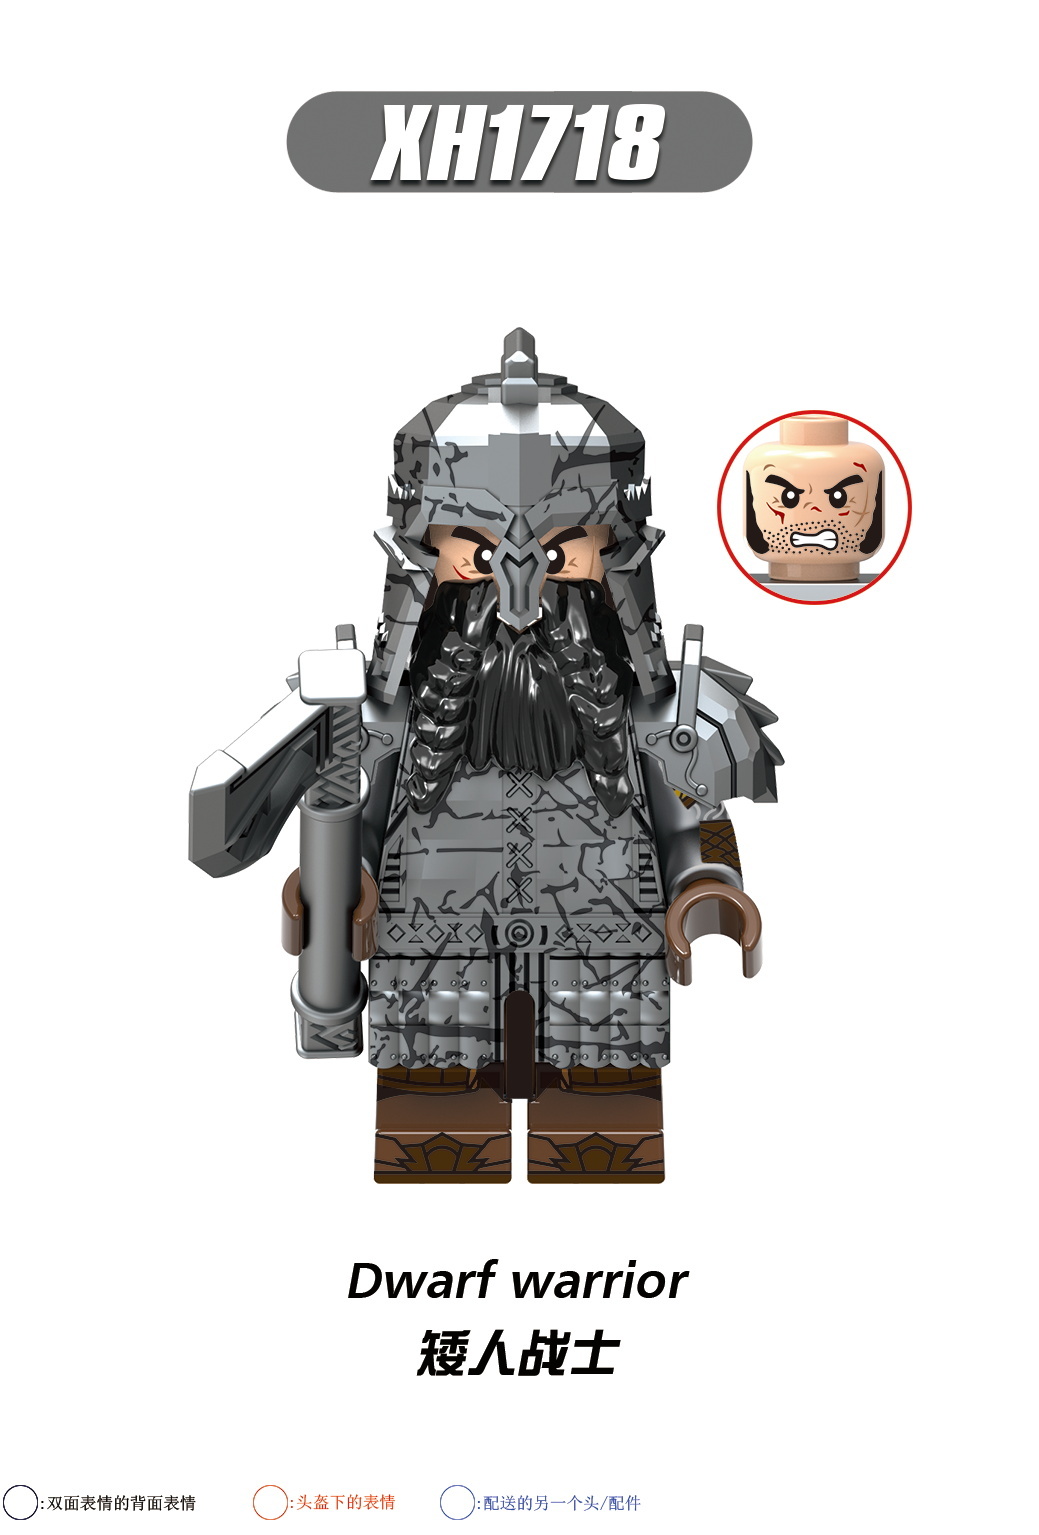 XH1714 1715 1716 1717 1718 1719 1720 1721 X0314 Warcraft Bricks Building Blocks Dwarf Warrior Movie Series Characters Action Figures Educational Toys For Children's Gifts